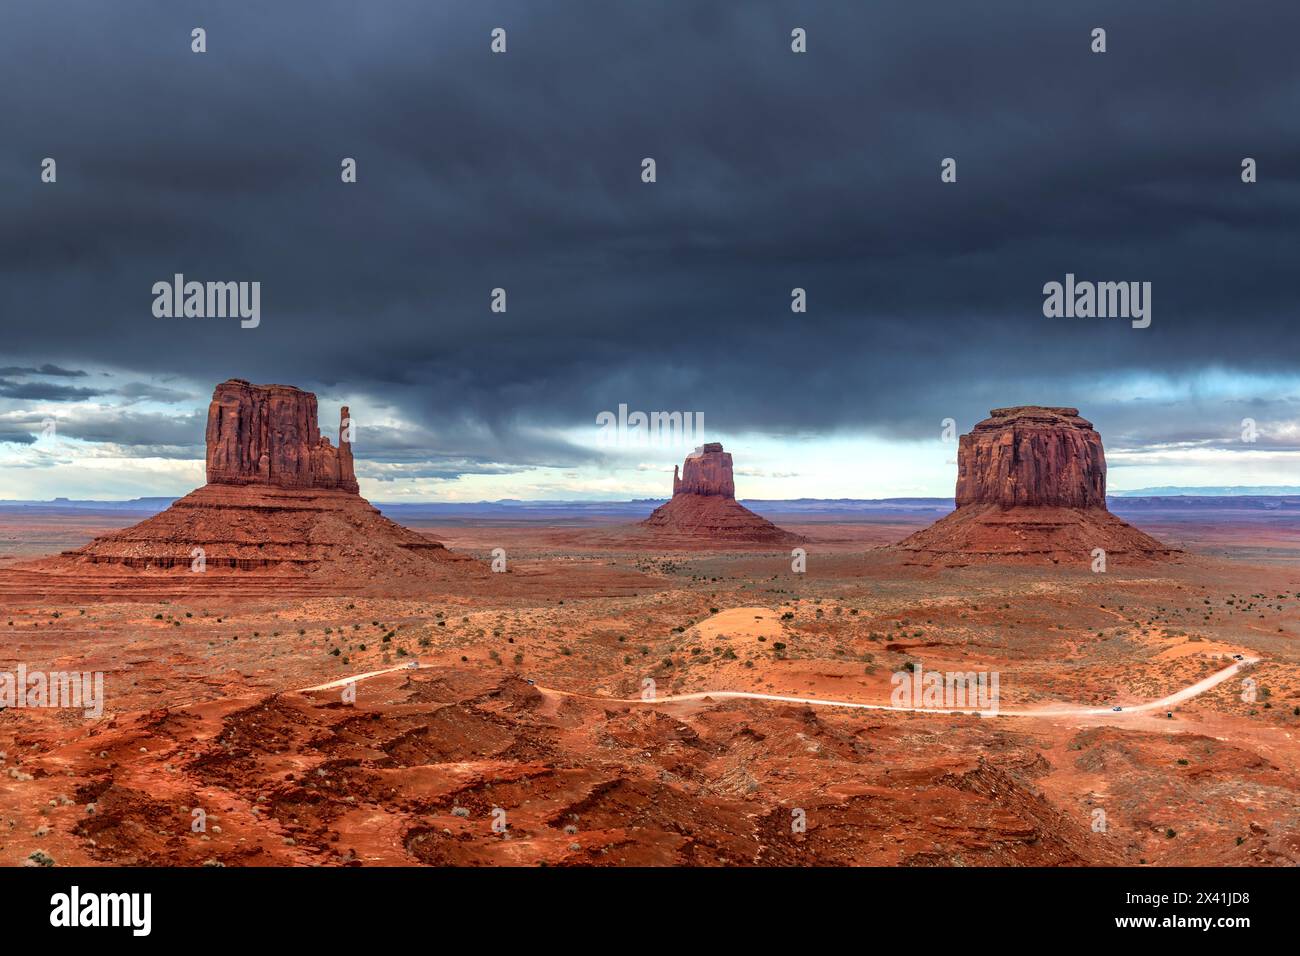 Storm clouds form over East, West and Merrick Butte at Monument Valley while sunshine still penetrates to highlight the vibrant red terrain and roadwa Stock Photo